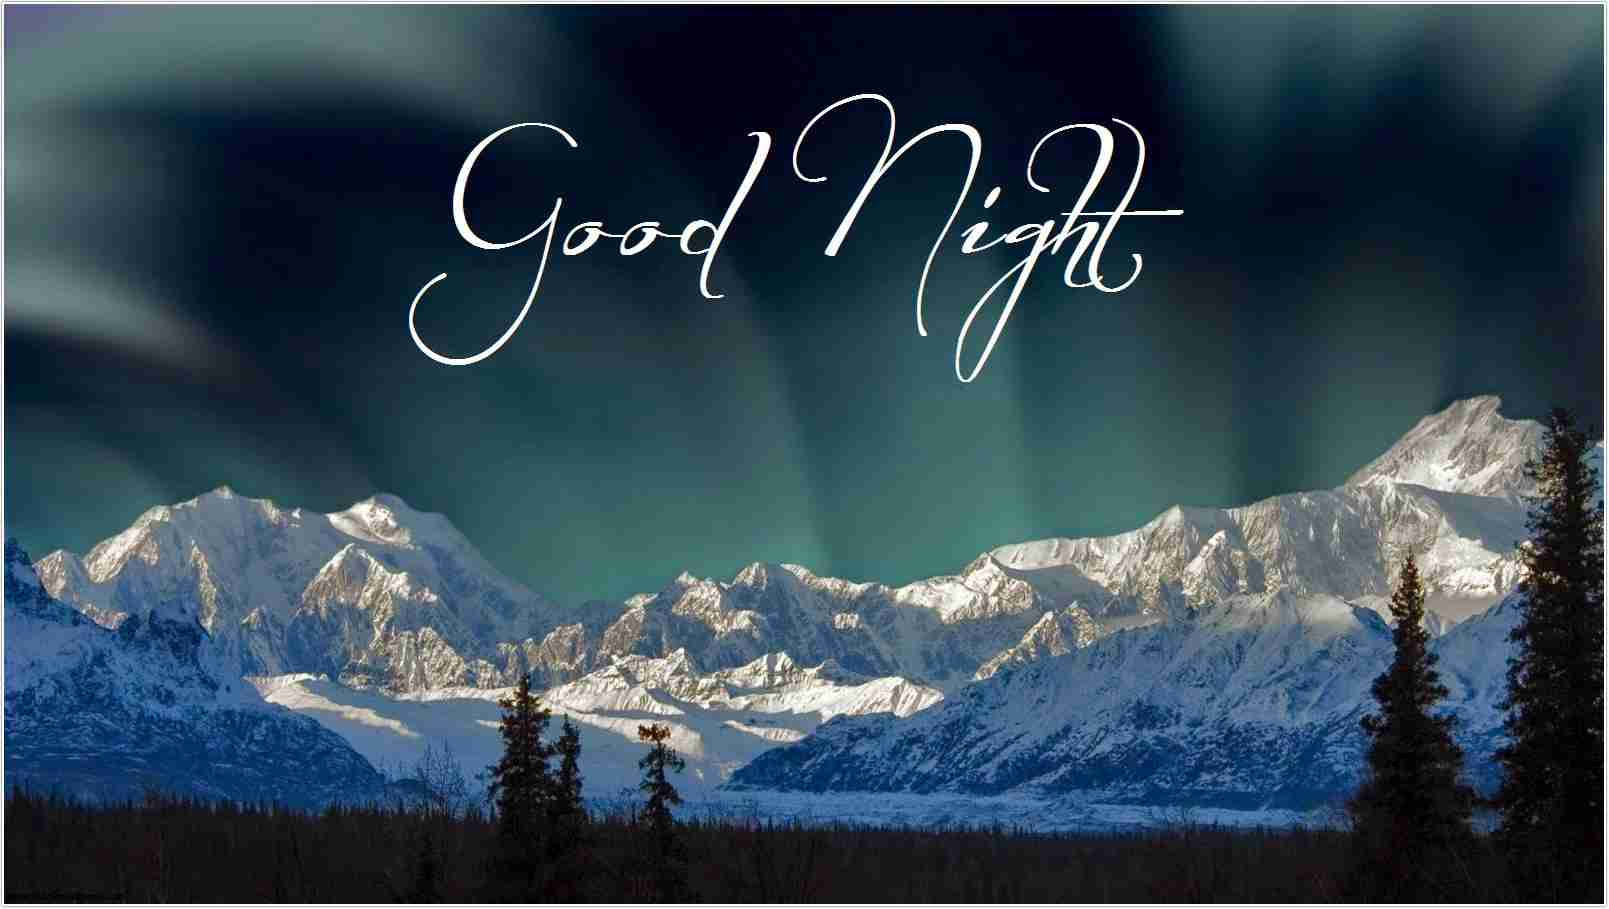 Free Good Night Wallpaper Downloads, [100+] Good Night Wallpapers for FREE  